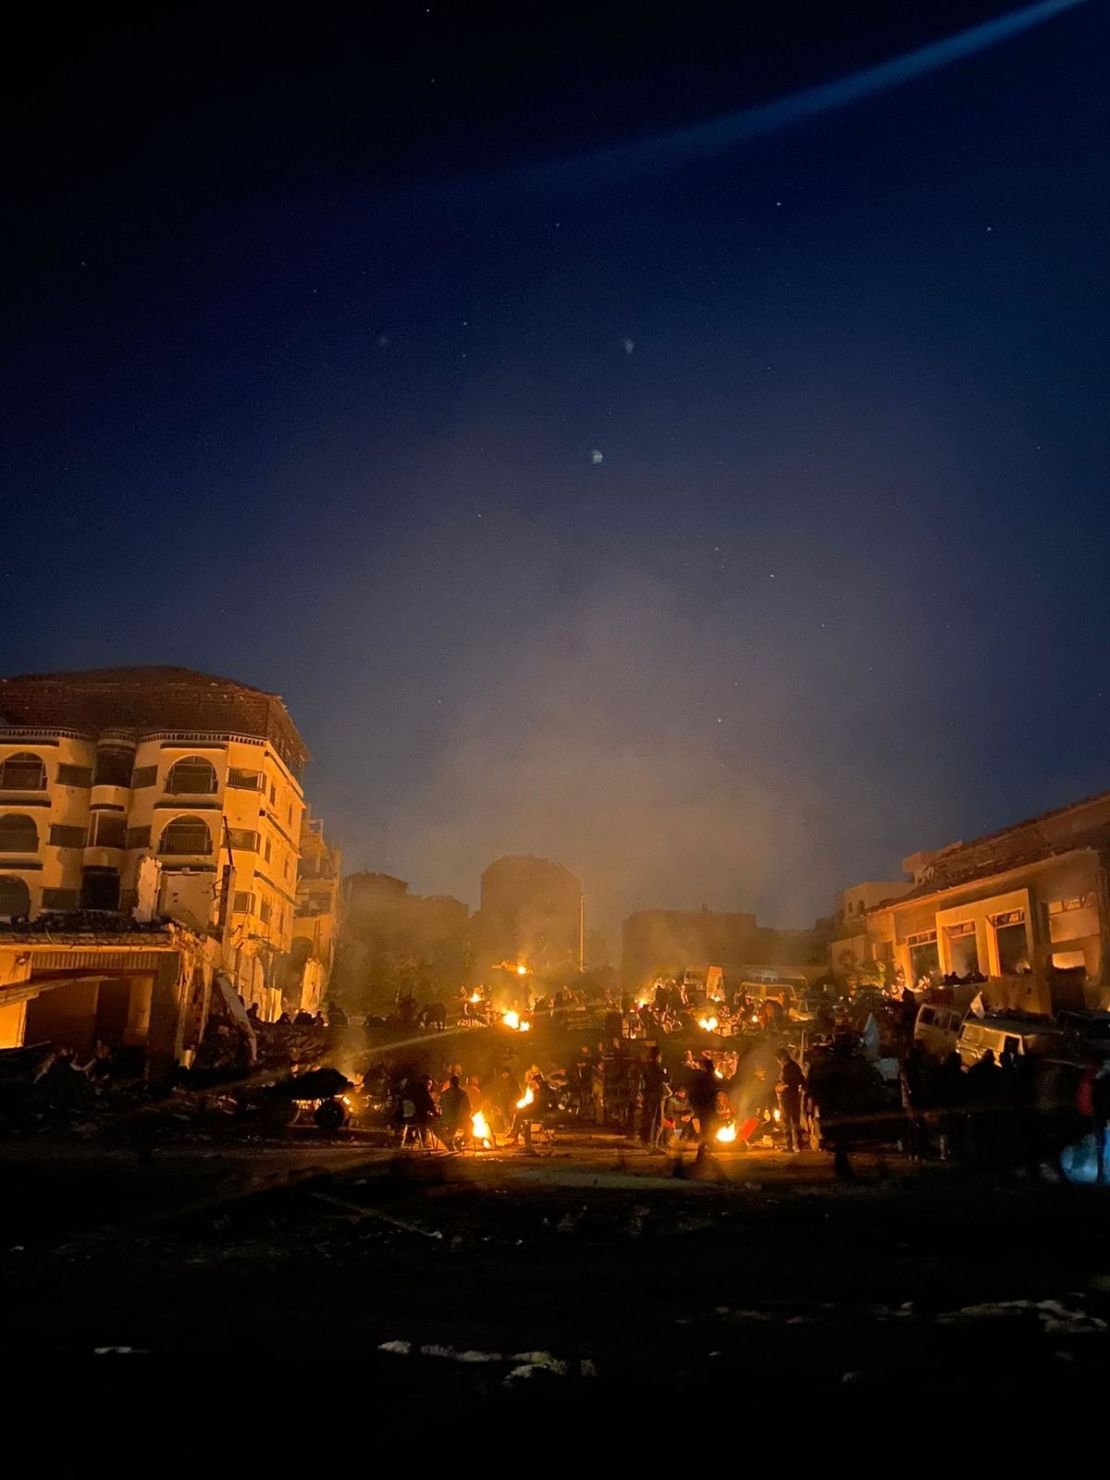 A photo taken by Abdallah Dalee in the early hours of February 29 shows a crowd of people waiting by firelight for the aid trucks to cross into northern Gaza.